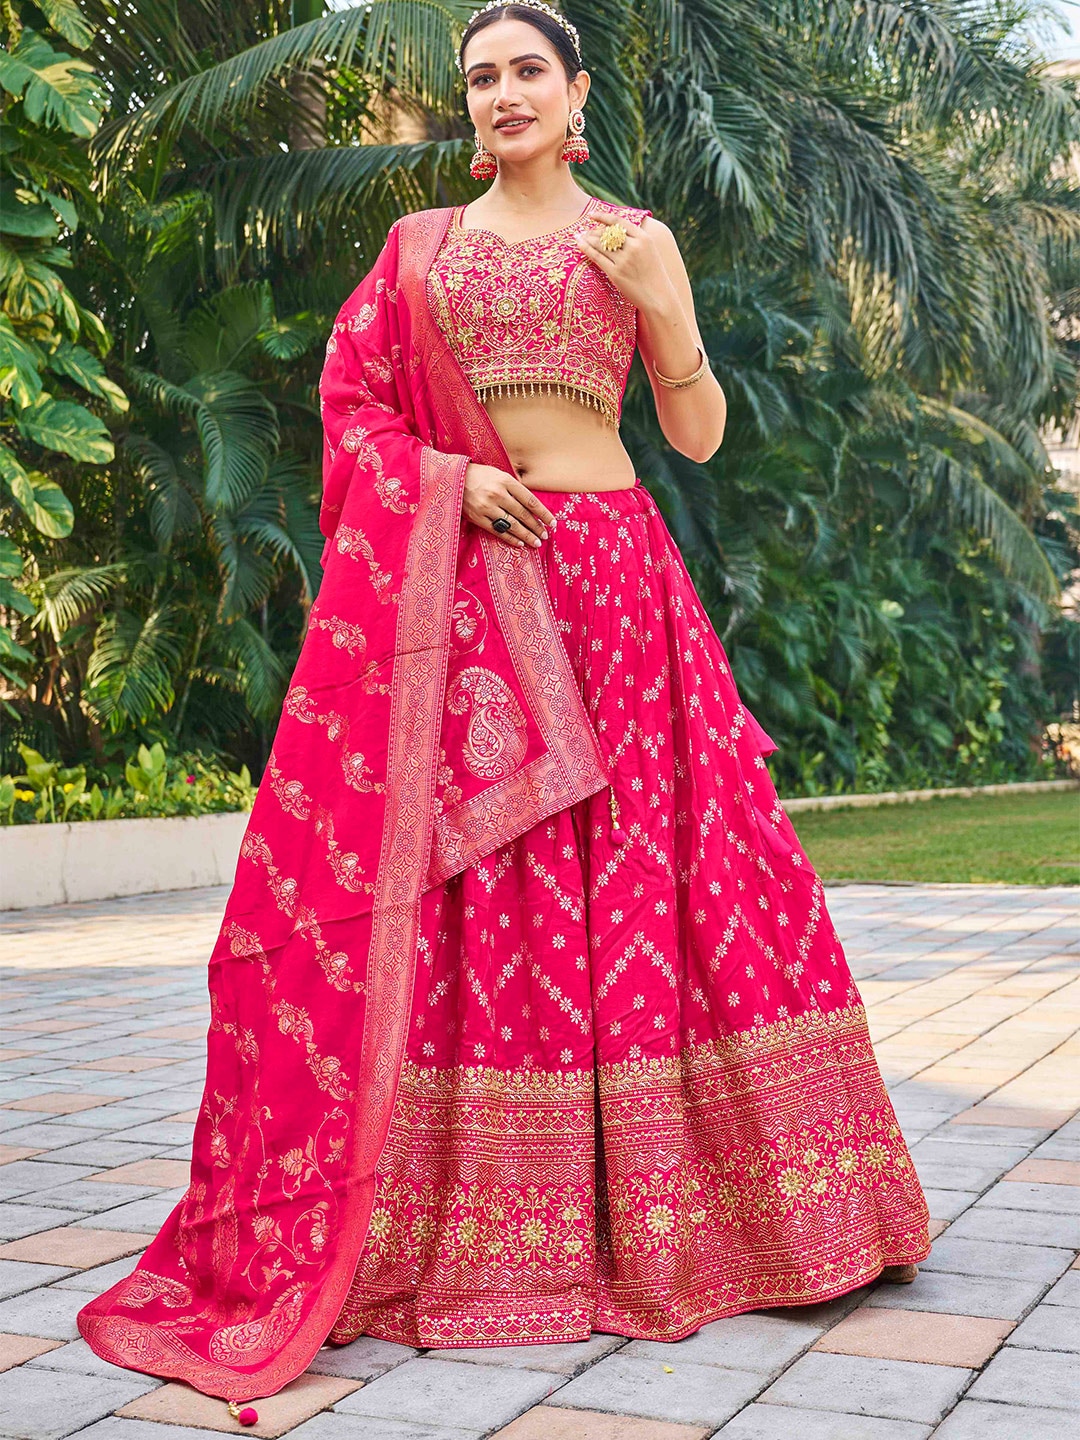 Chandbaali Embroidered Sequined Ready to Wear Lehenga & Blouse With Dupatta Price in India